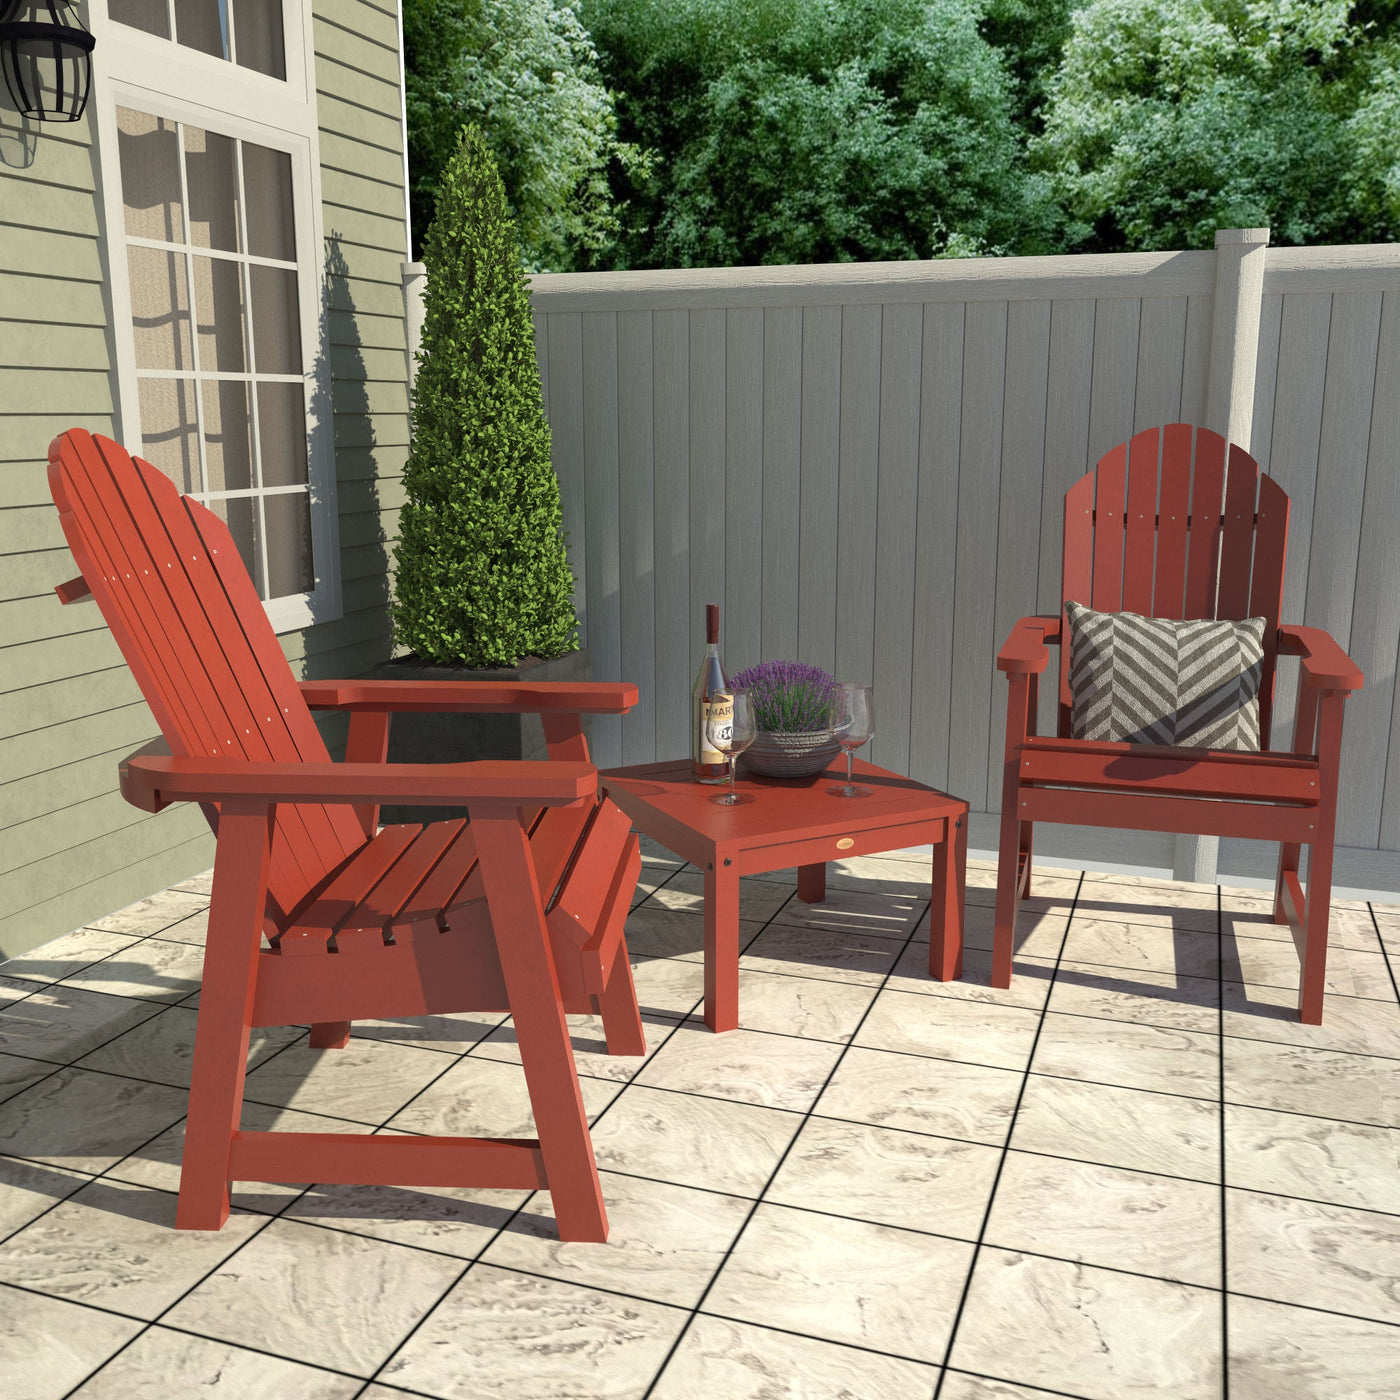 2 Hamilton Deck Chairs with Adirondack Side Table Kitted Sets Highwood USA 